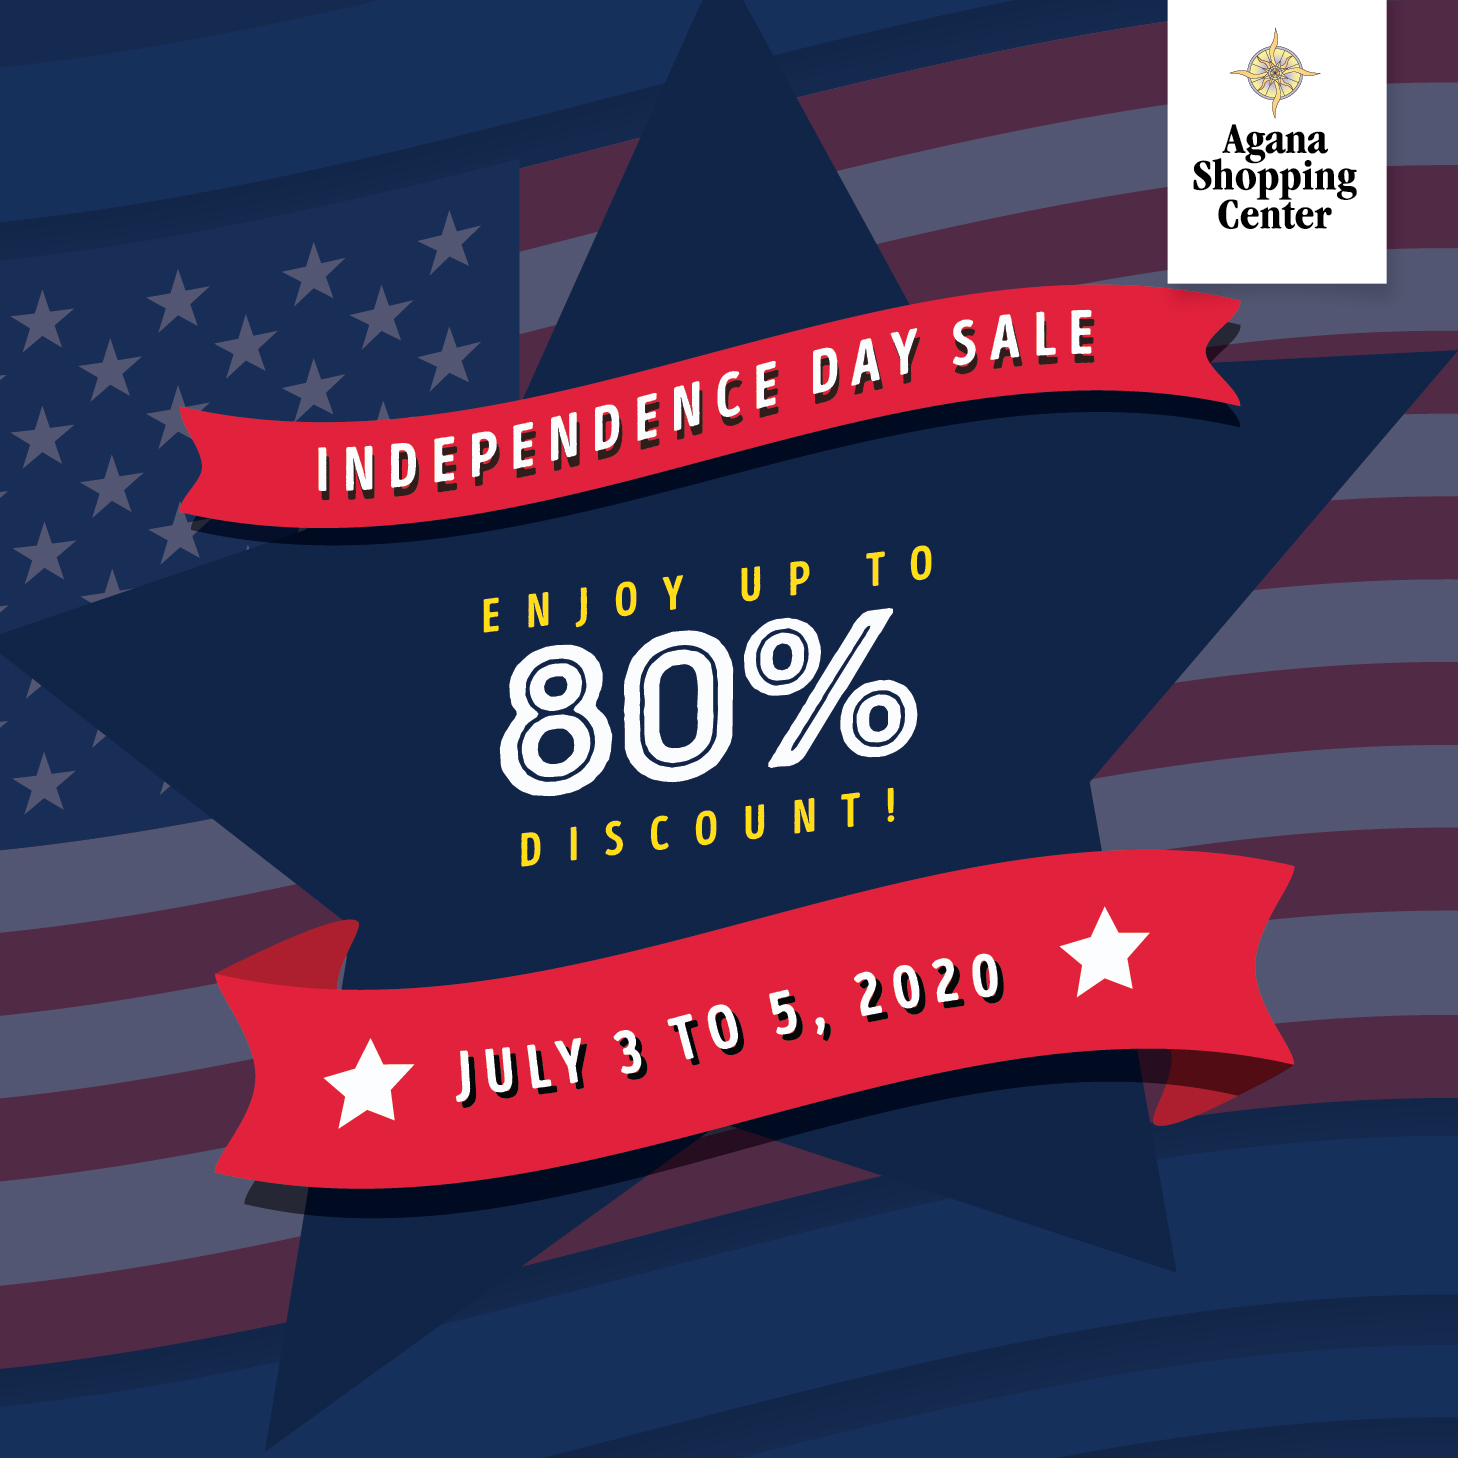 Independence Day Sale - Agana Shopping Center